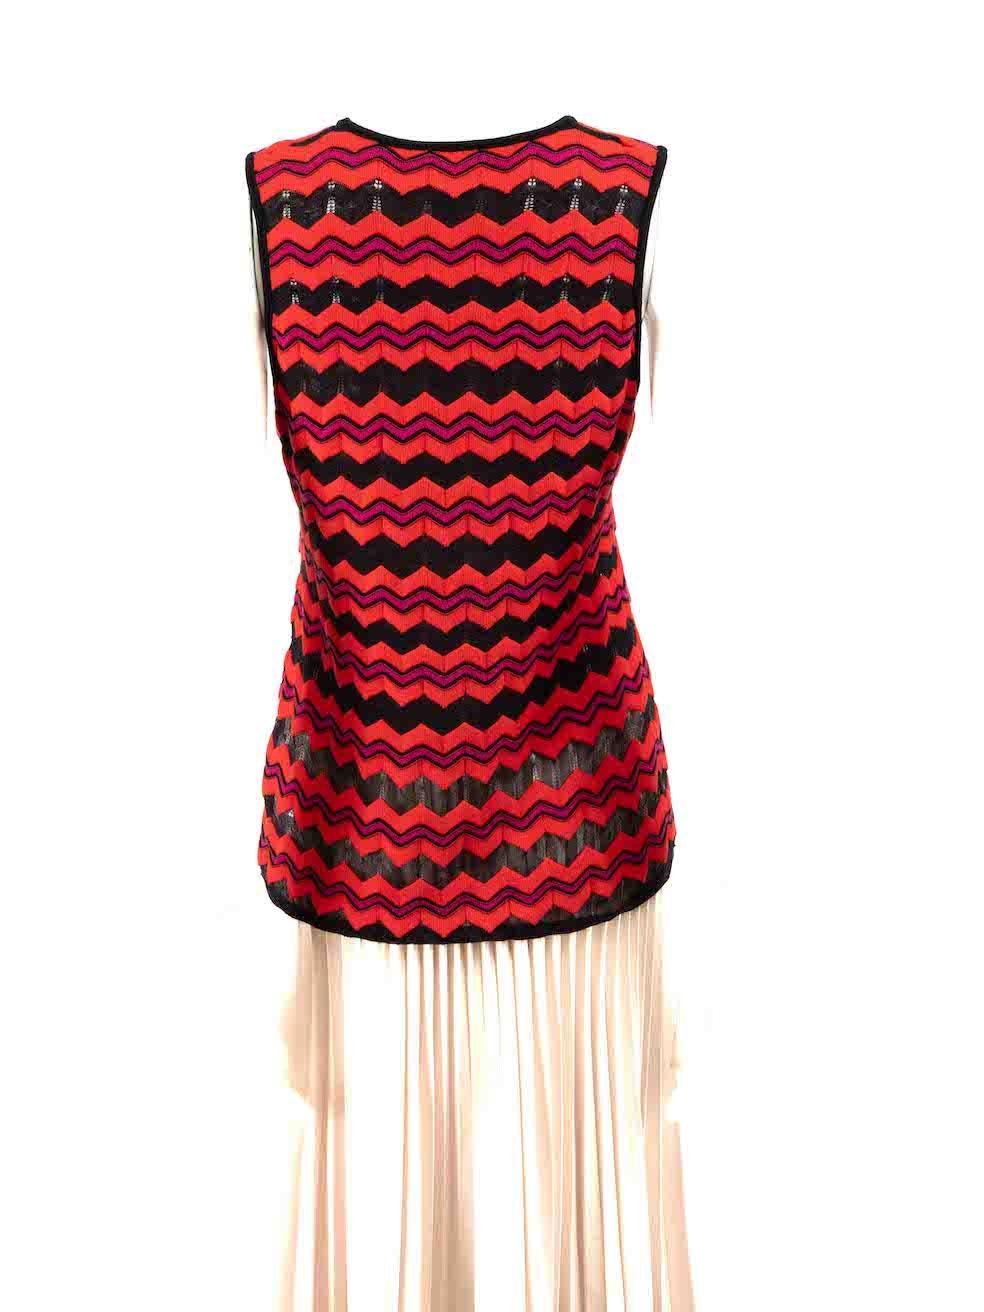 Missoni Red Zigzag Striped Knit Sleeveless Top Size L In Good Condition For Sale In London, GB